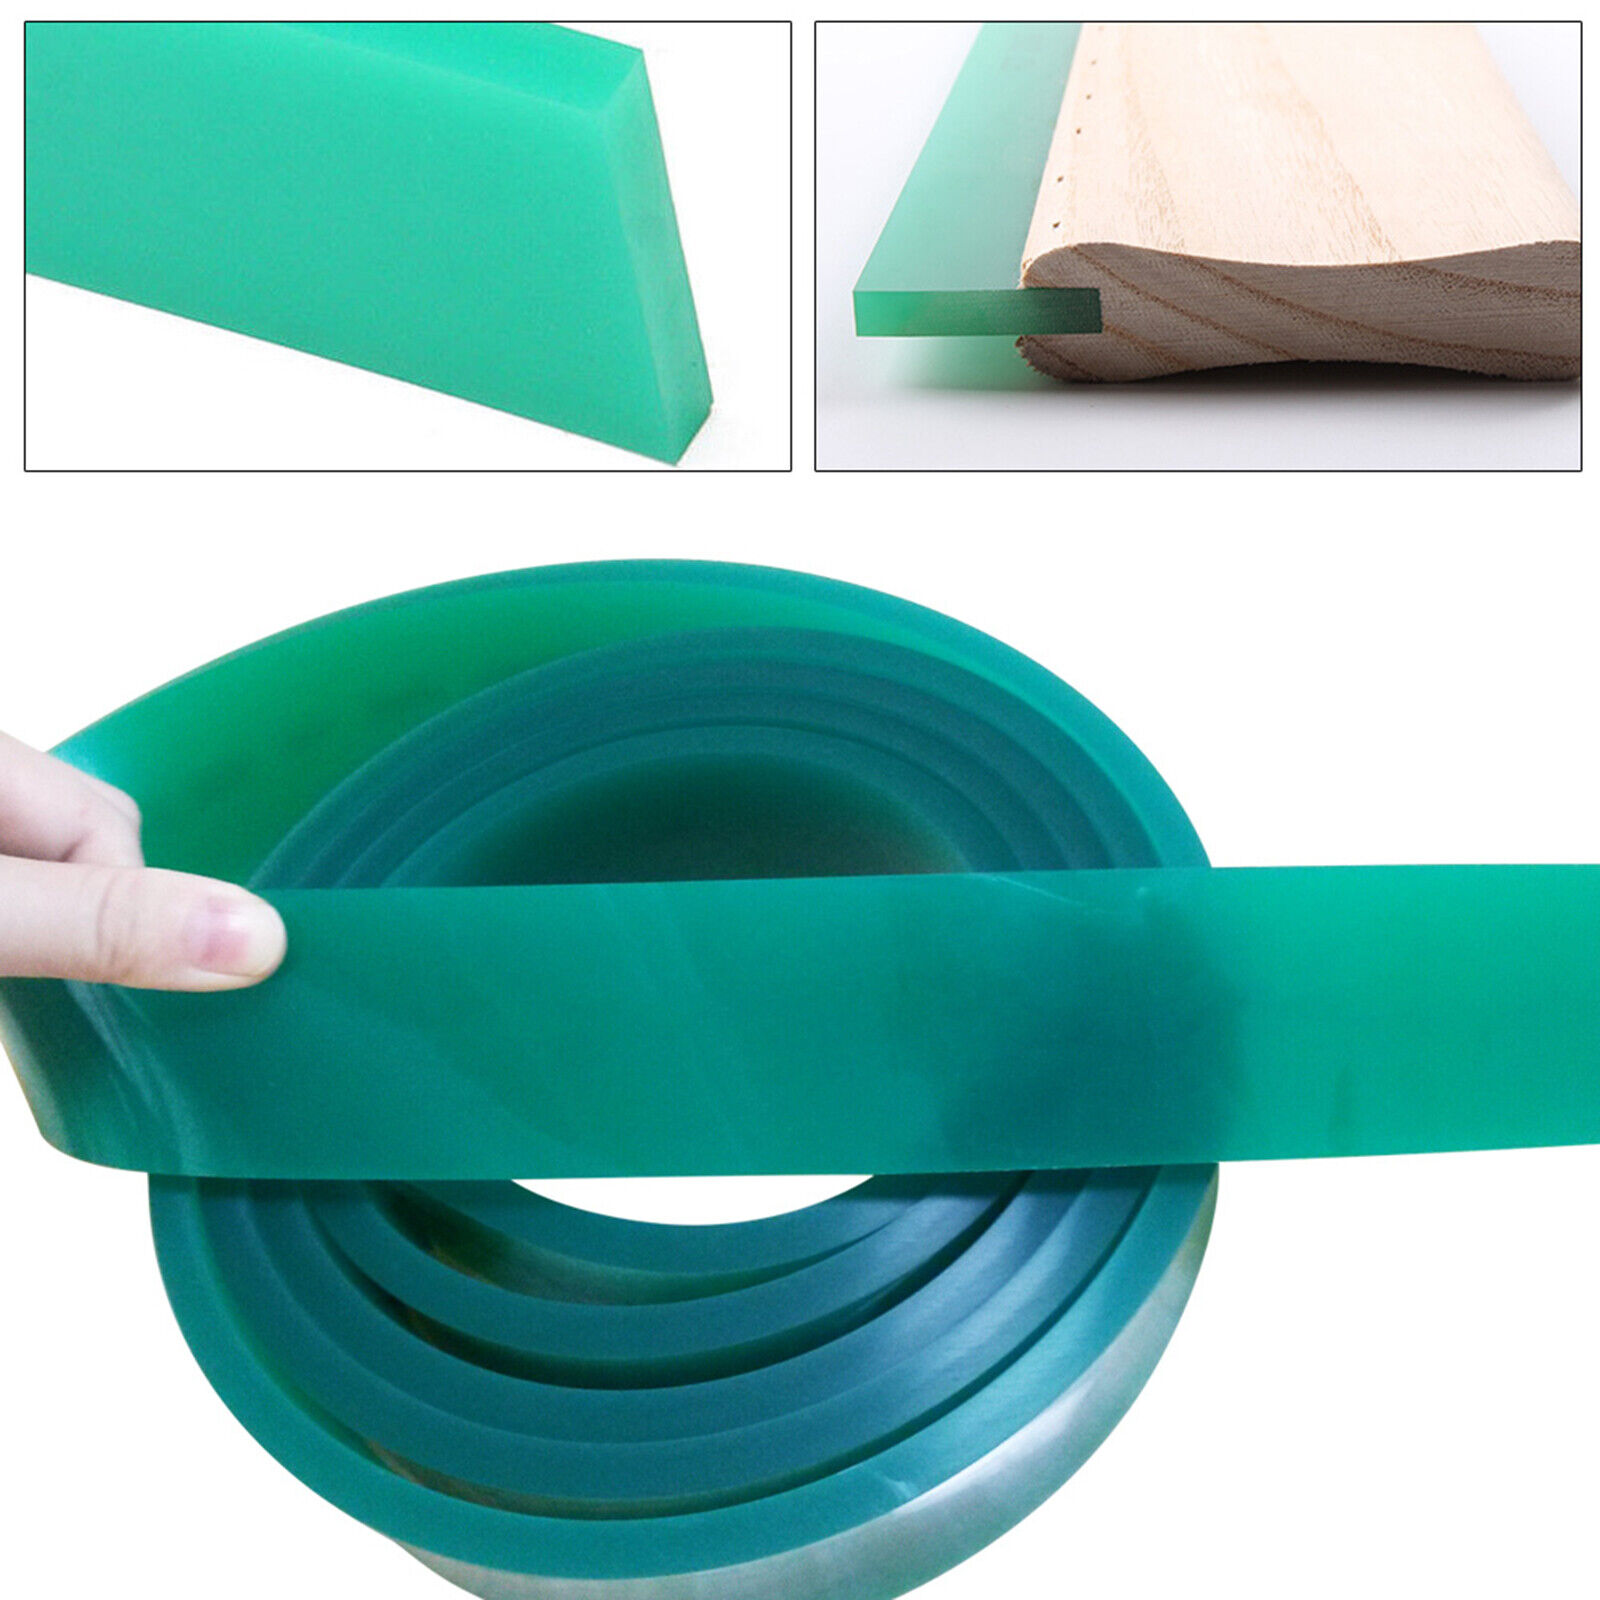 80 DURO 6FT 72" Silk Screen Printing Squeegee Blade Polyurethane Rubber Green Unbranded Does Not Apply - фотография #2